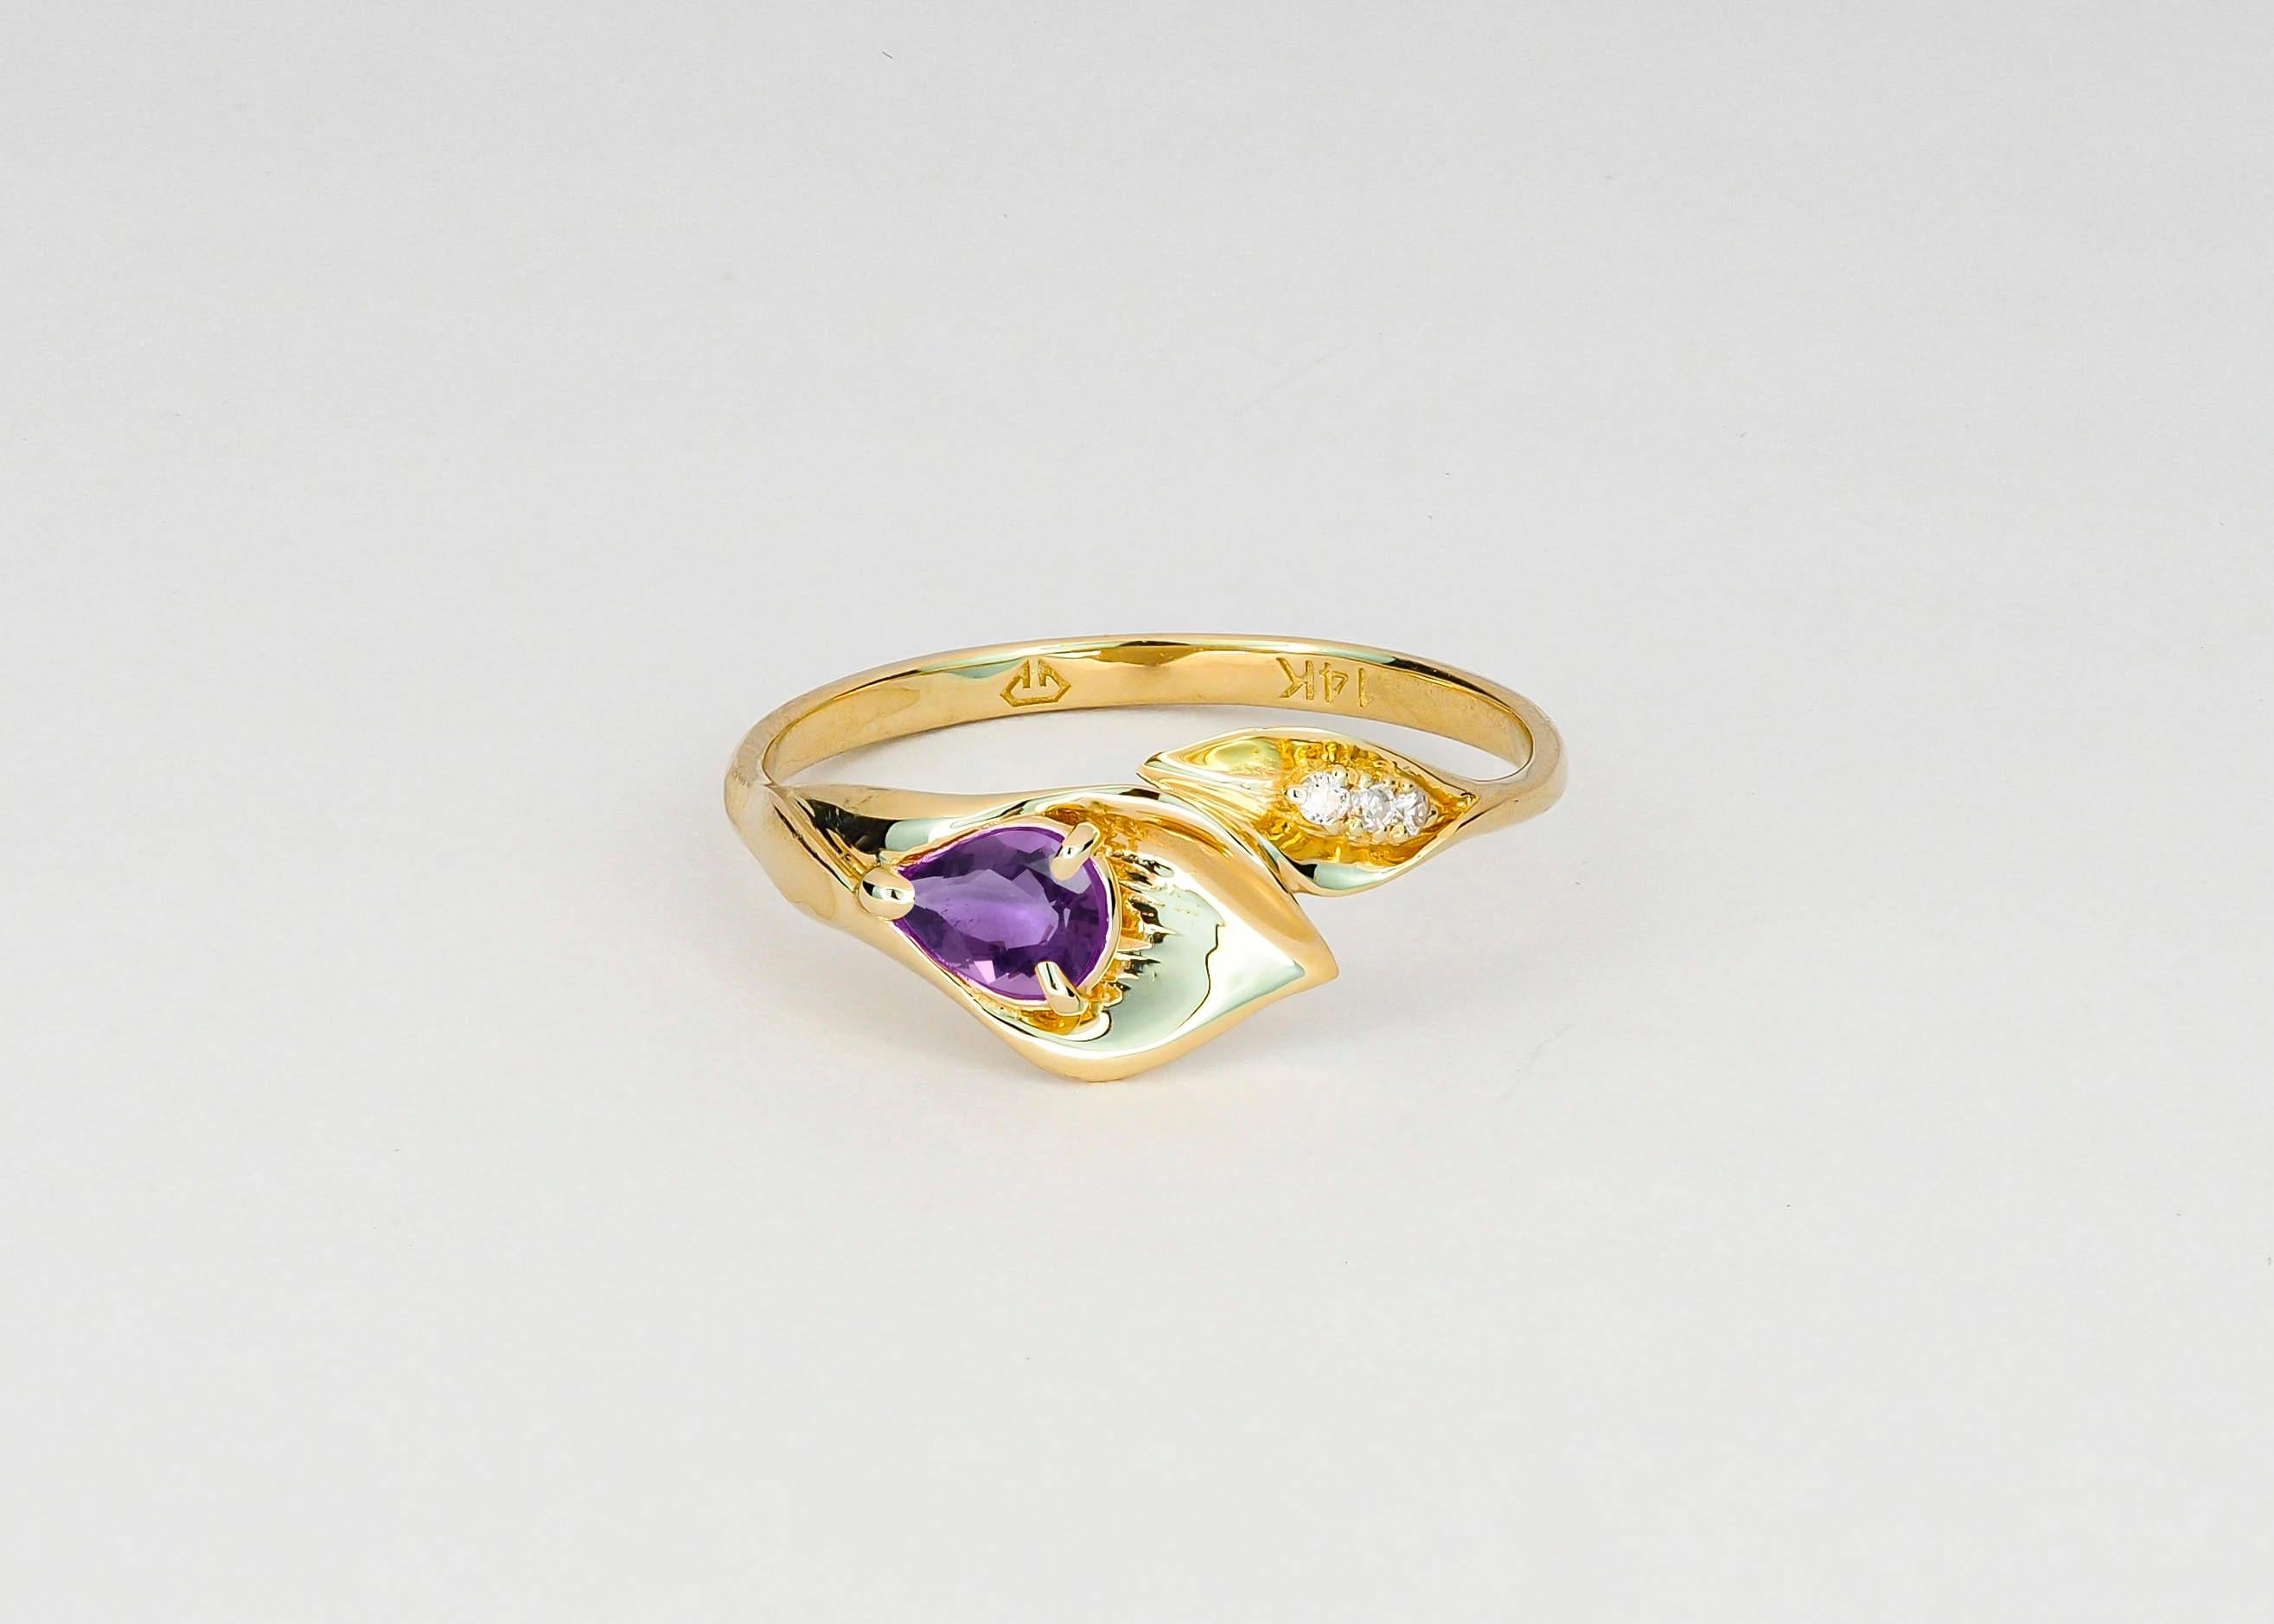 Modern Lily Calla Gold Ring, 14 Karat Gold Ring with Amethyst and Diamonds